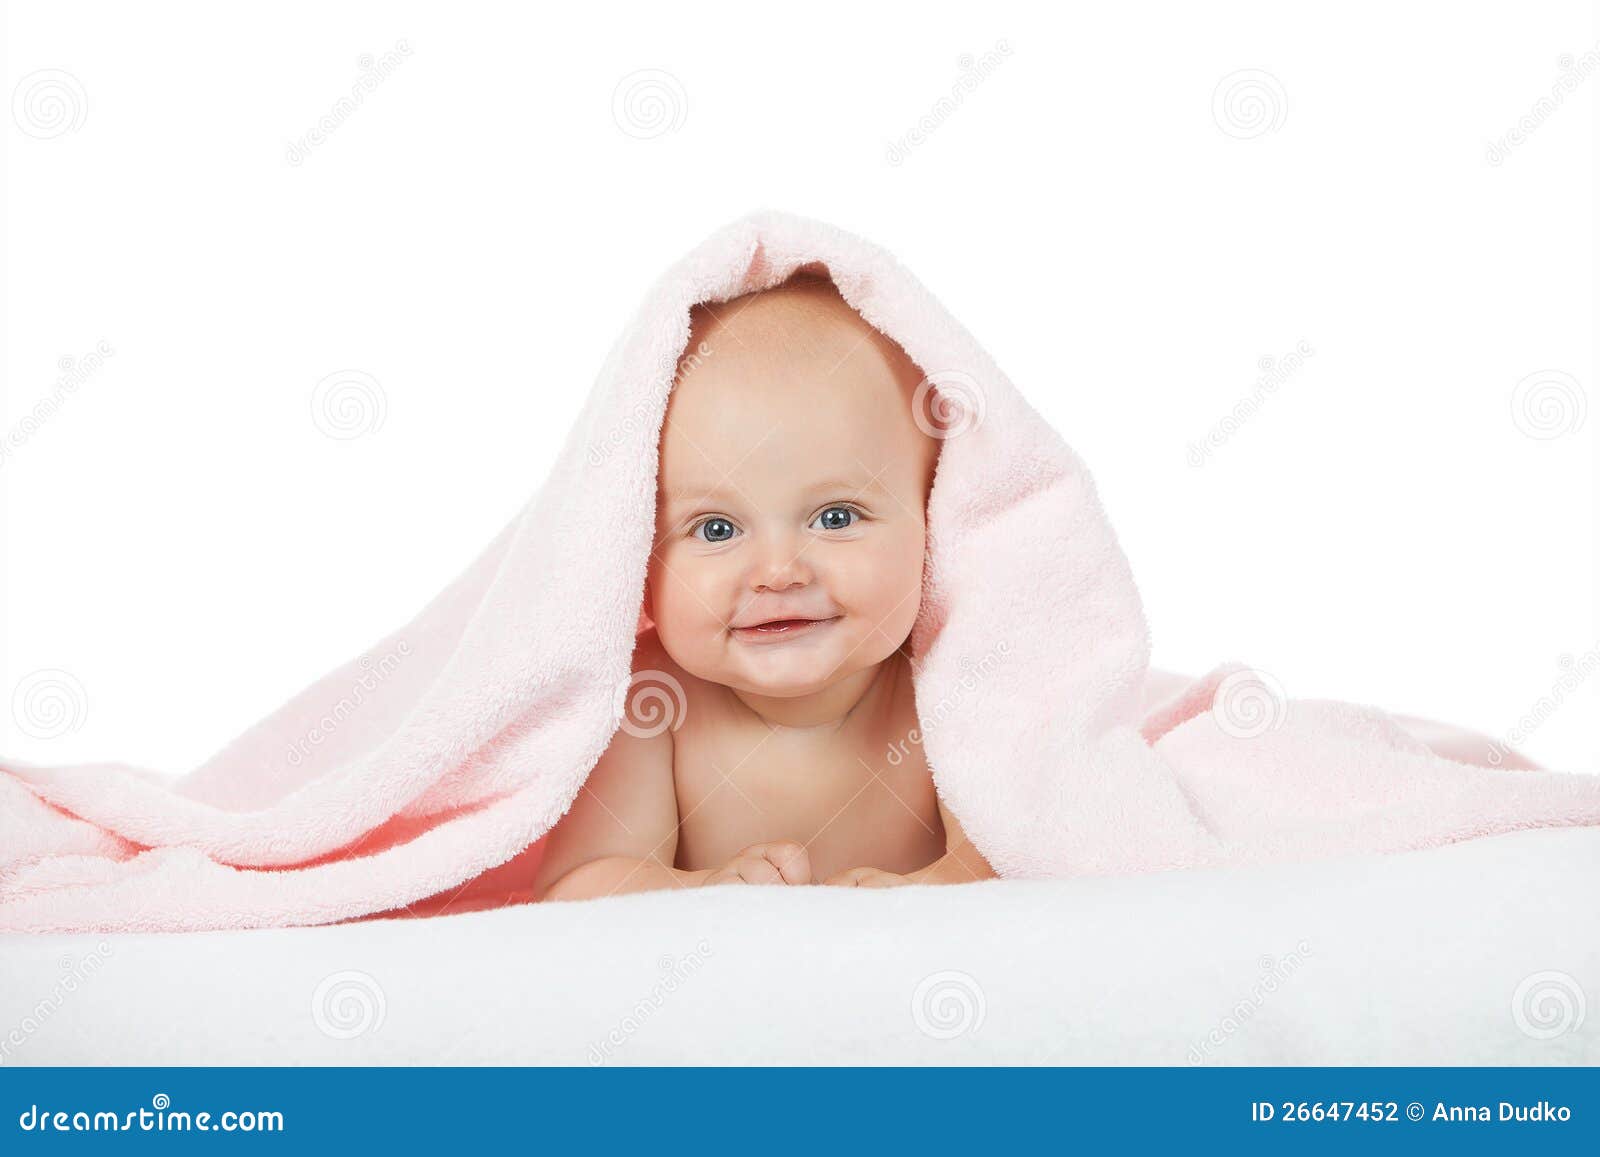 Boy with towel stock photo. Image of life, cute, child - 26647452